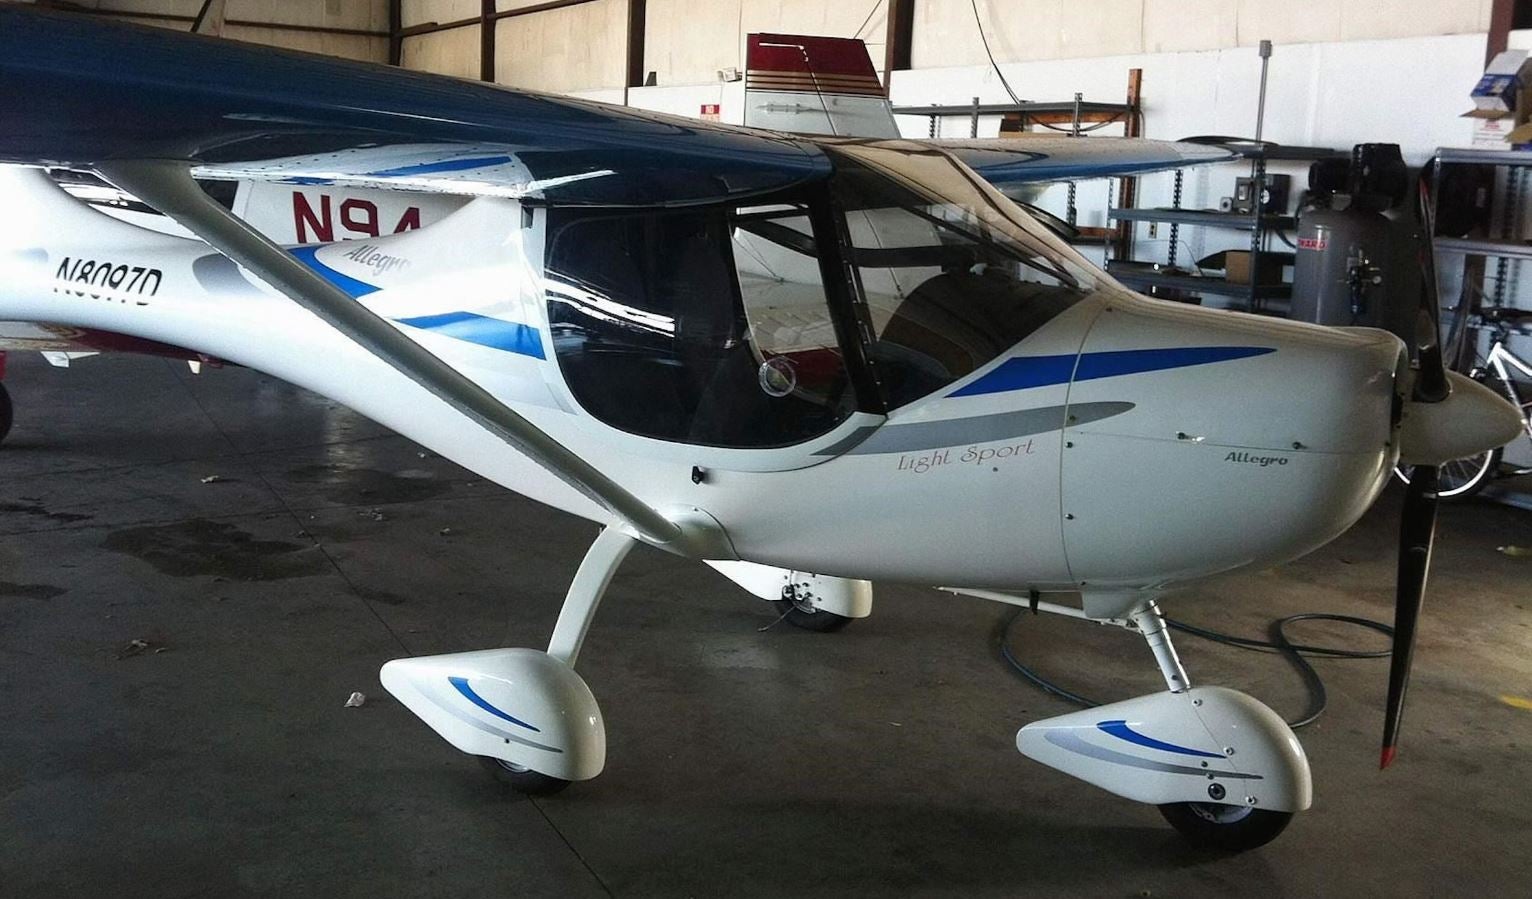 This 2007 Fantasy Air Allegro LSA Is a Performance-Minded ‘AircraftForSale’ Top Pick